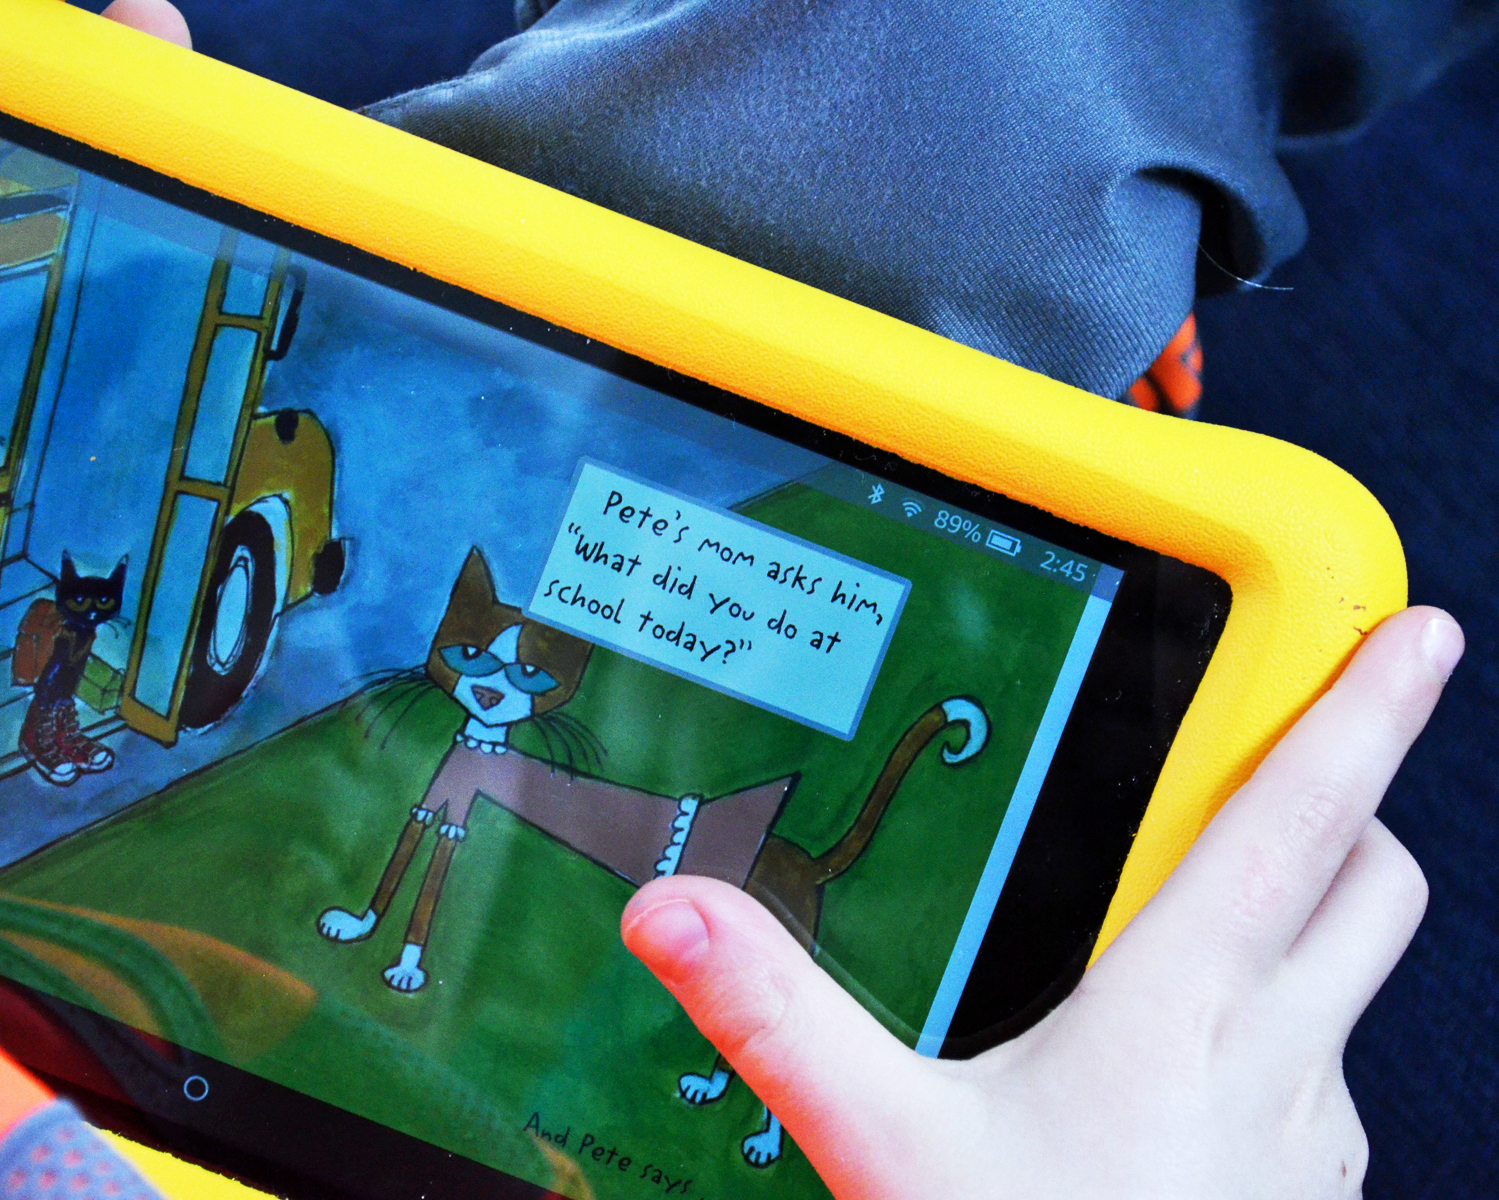 How does the Amazon Kindle for Kids compare to the Ipad?